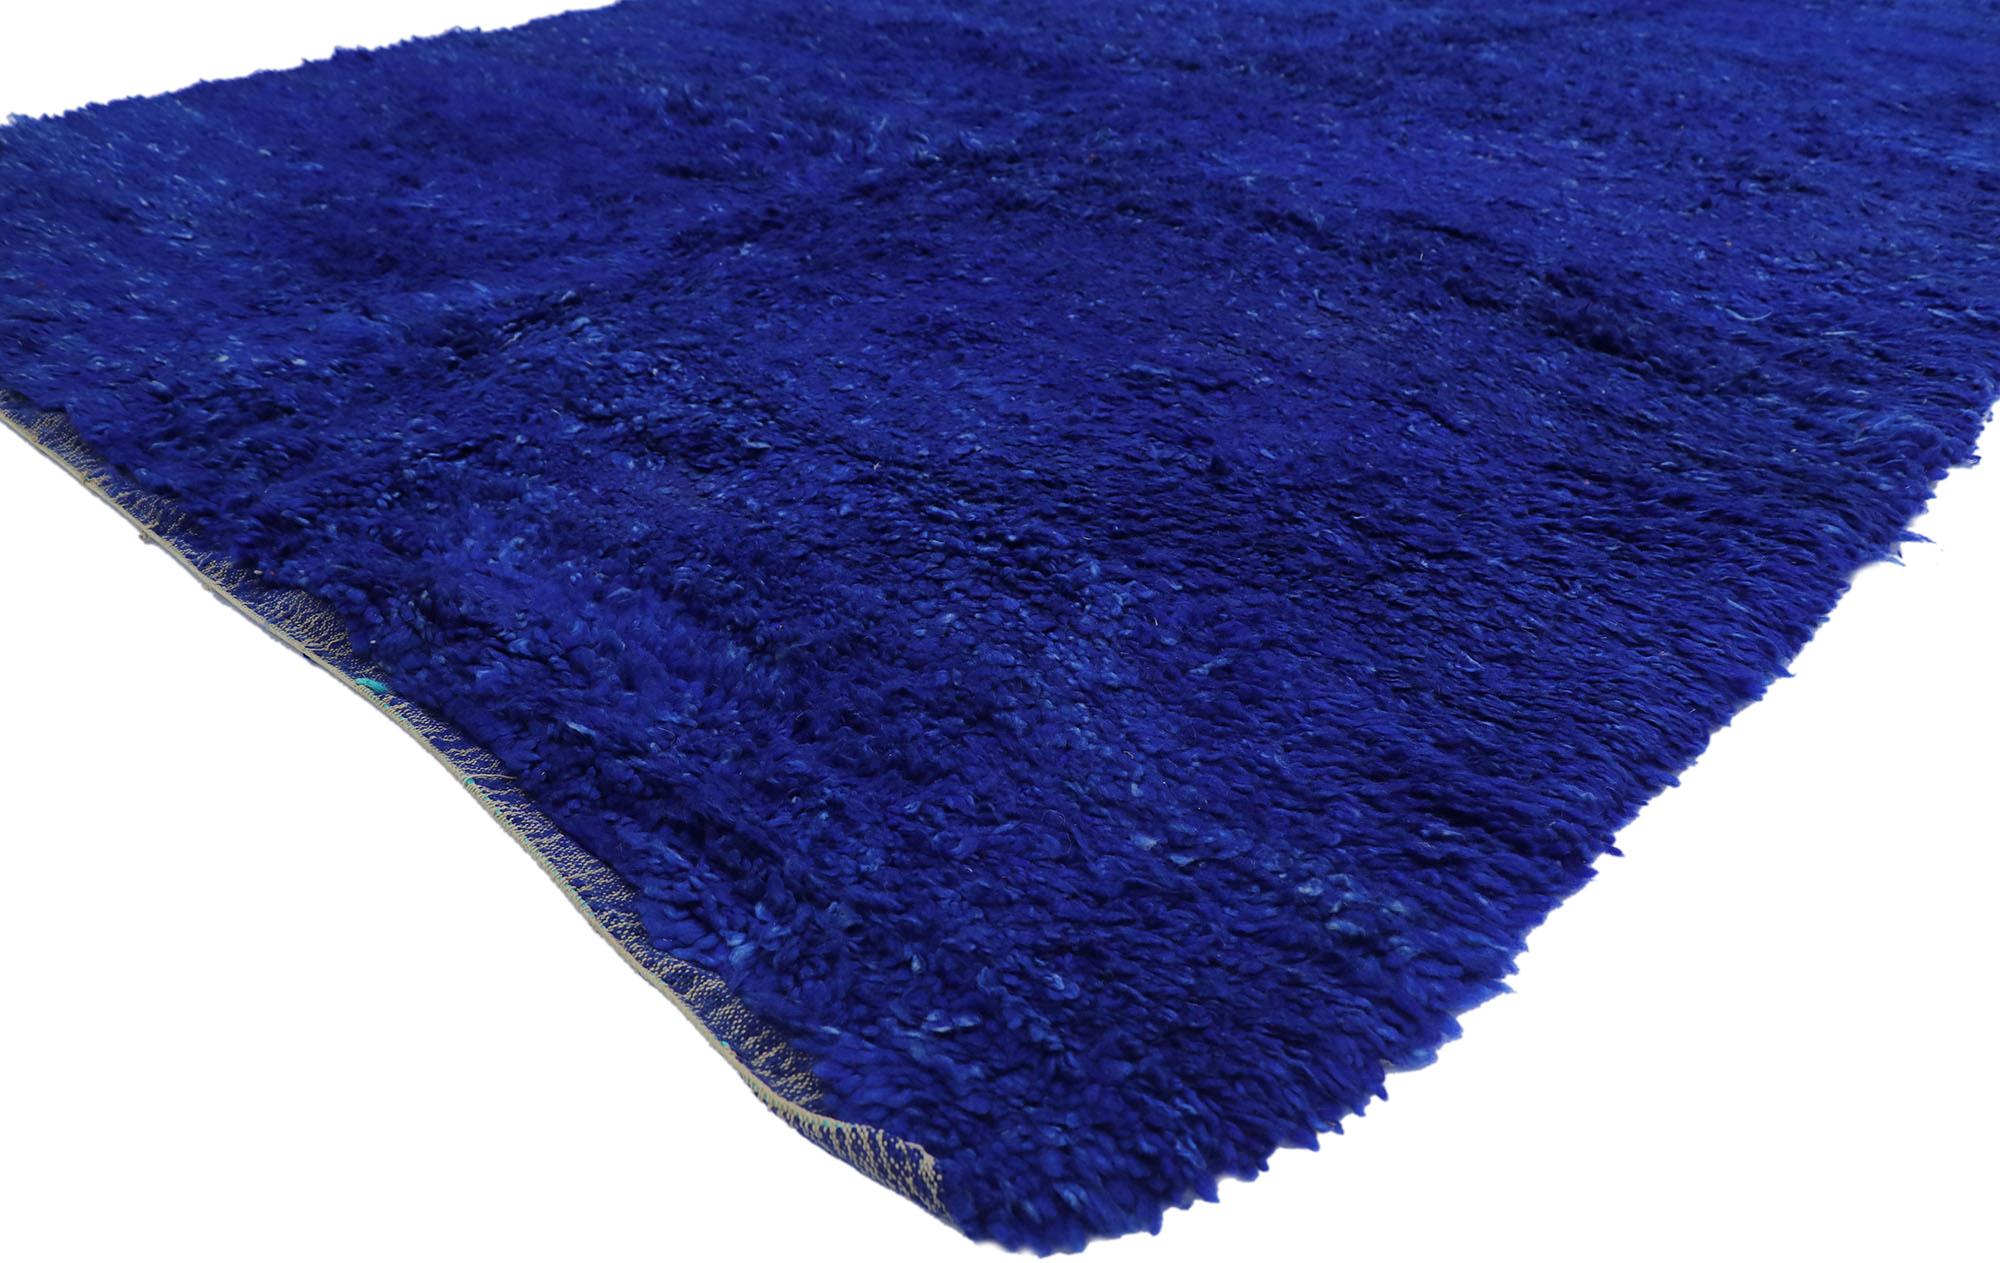 Cozy nomad meets mesmerizing Marjorelle Blue in this hand knotted wool vintage Beni MGuild Moroccan rug. Get ready to be transported to a peaceful and captivating place with this vintage Moroccan rug appearing as your magic carpet ride. Imagine a